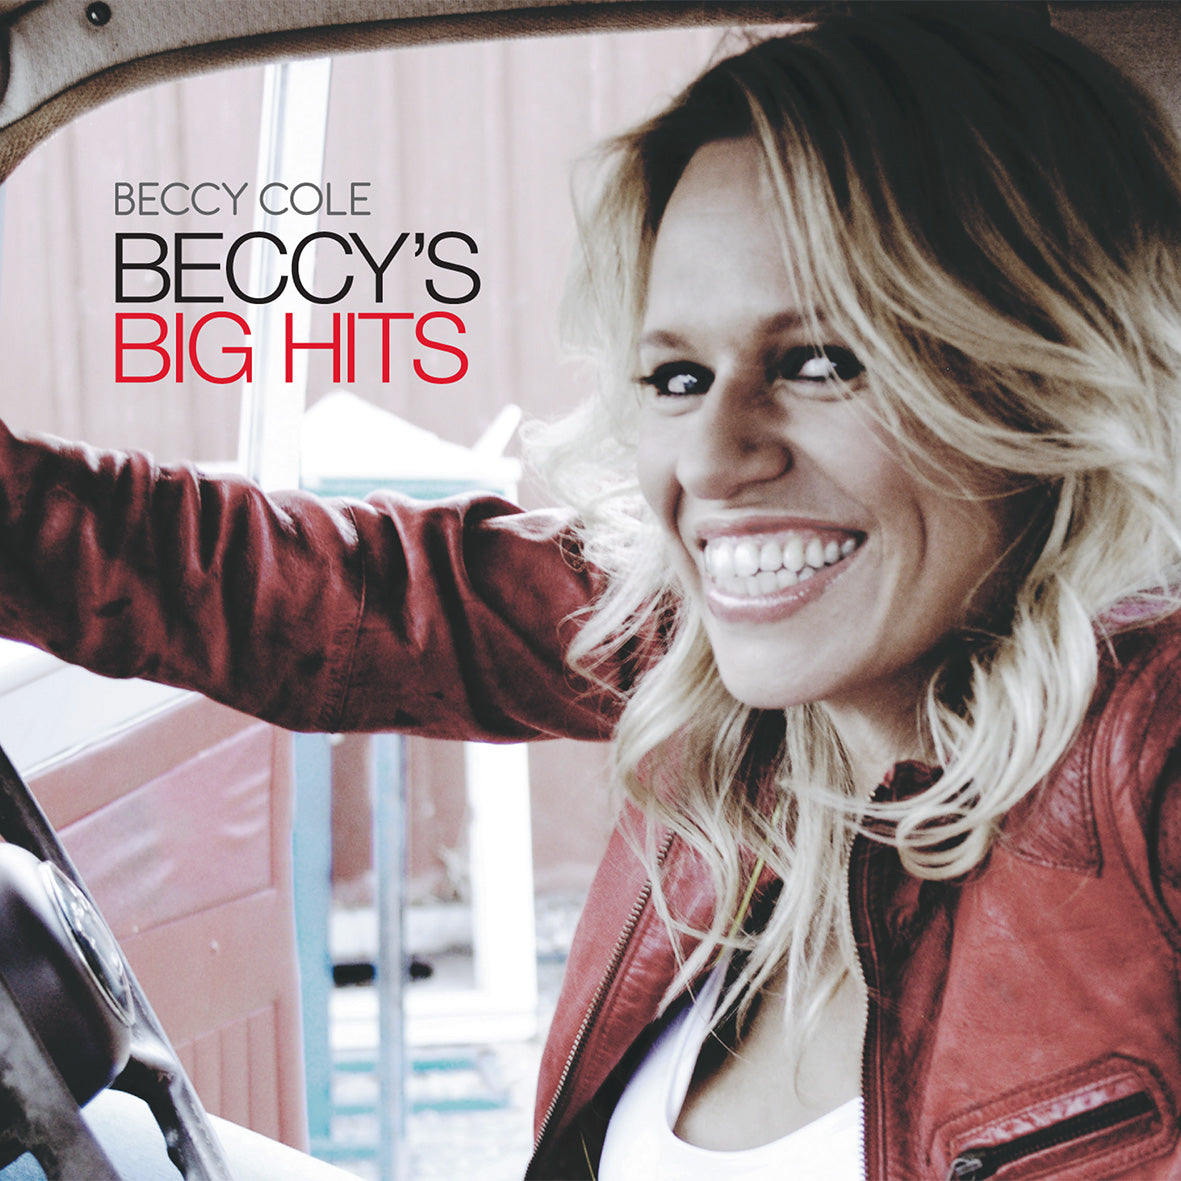 BECCY COLE - BECCY'S BIG HITS